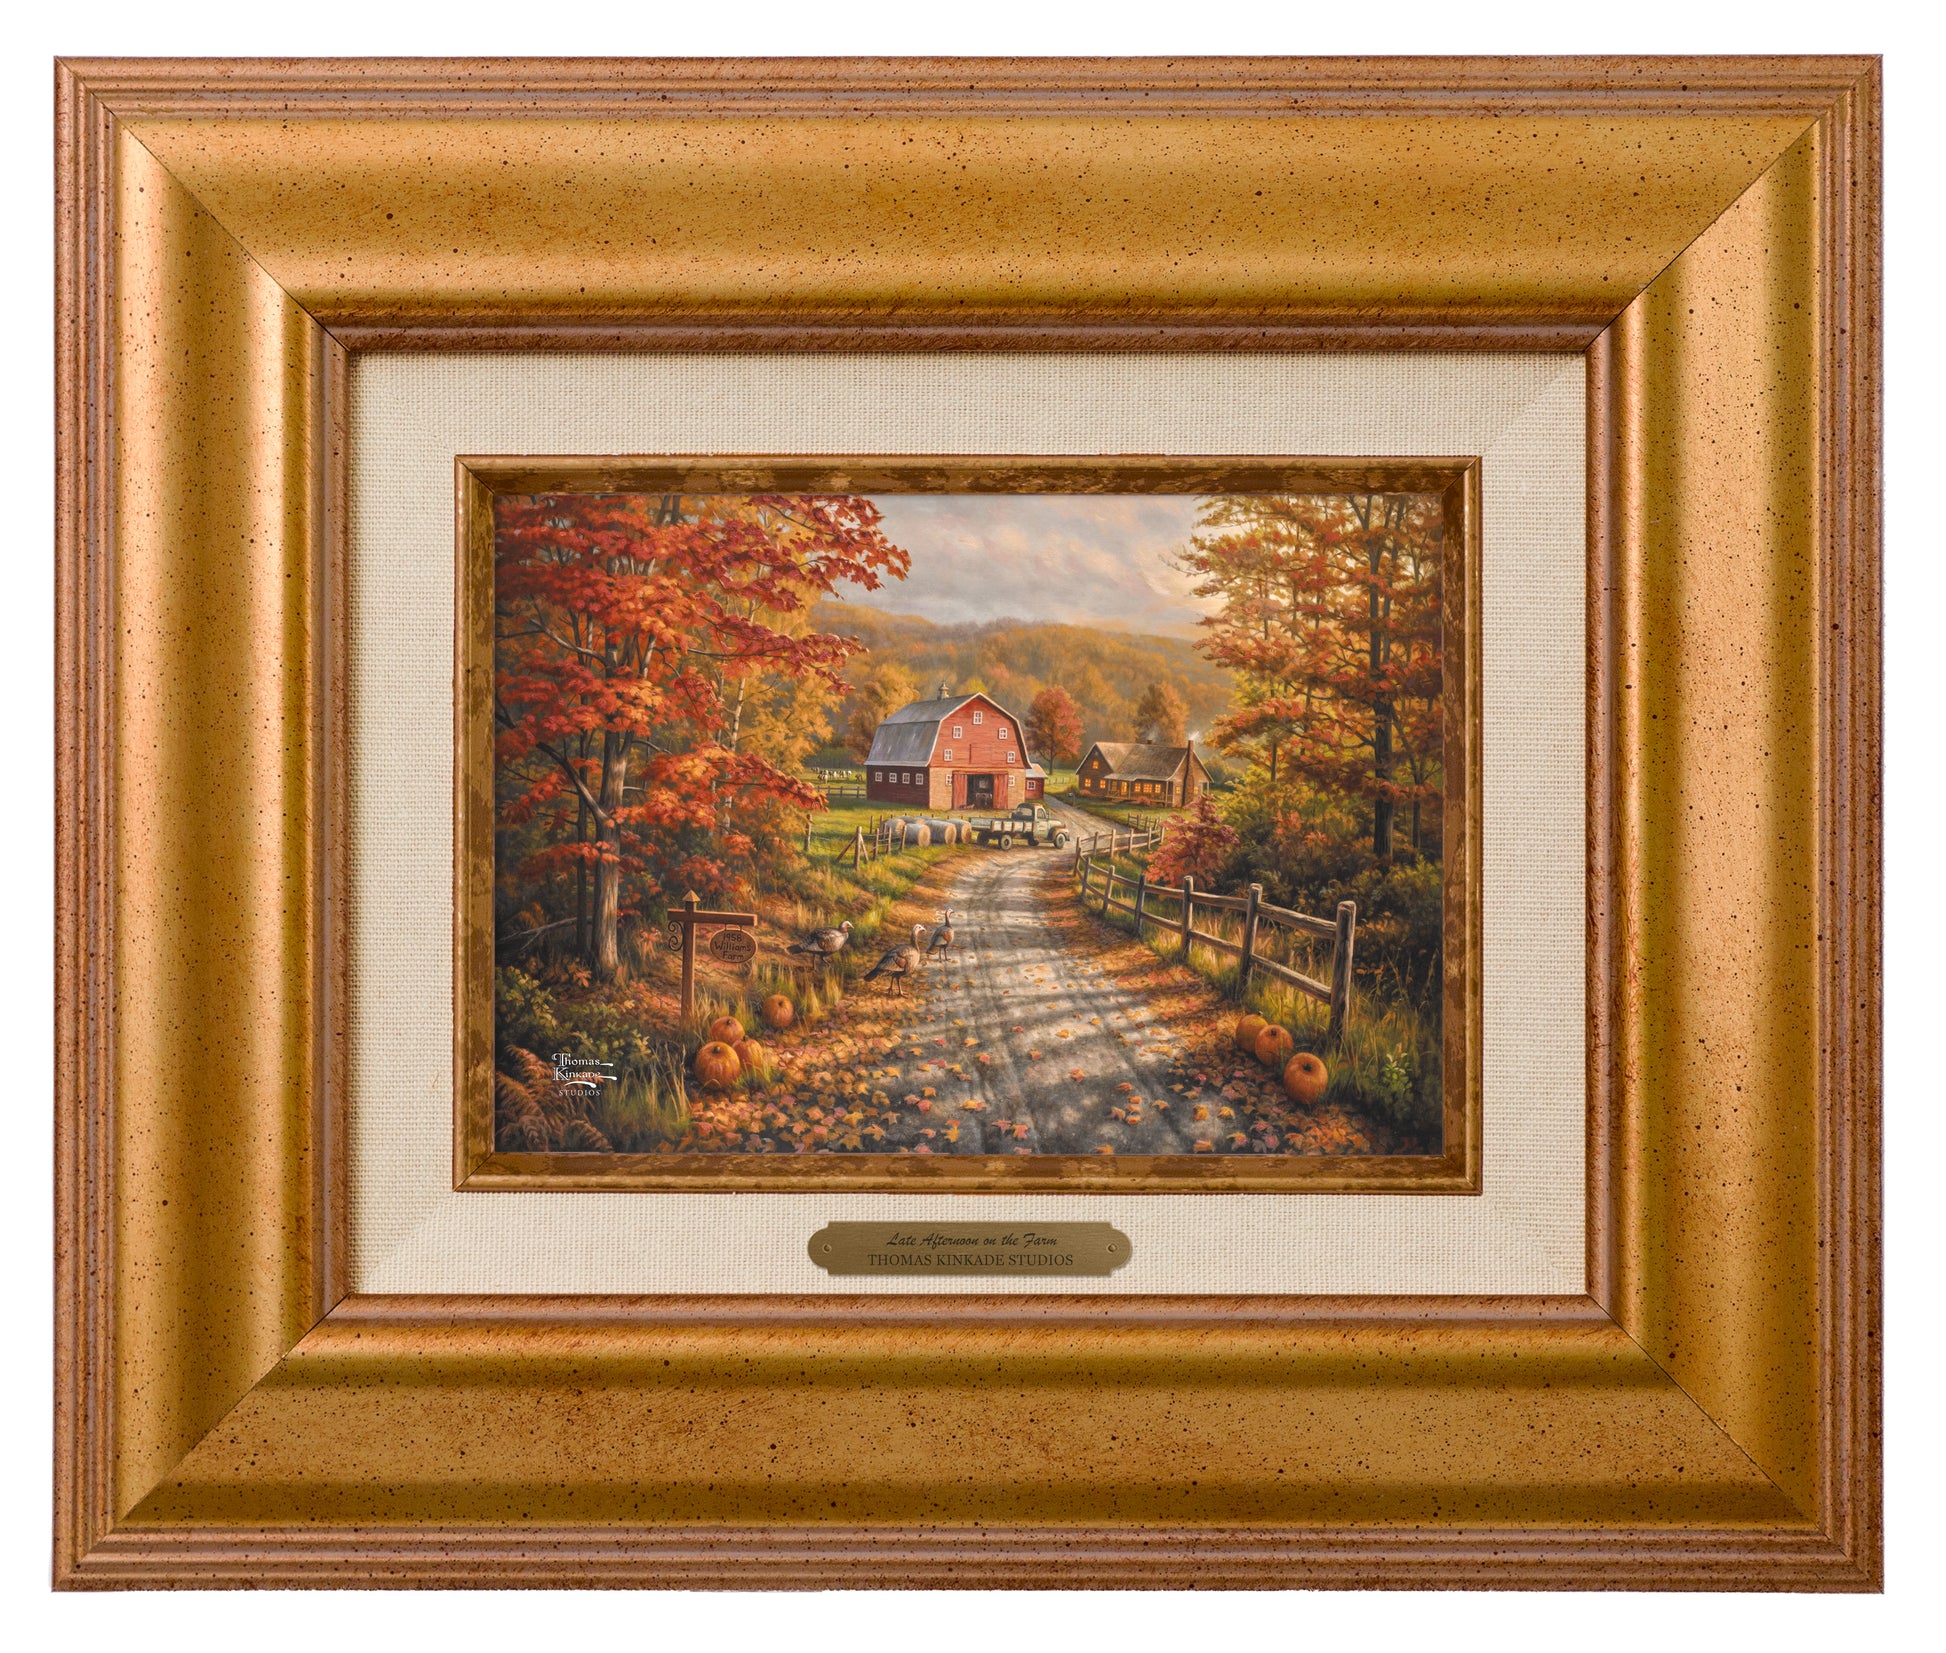 161453_BRW Late Afternoon on the Farm 5X7 - Golden Sunset Frame.jpg